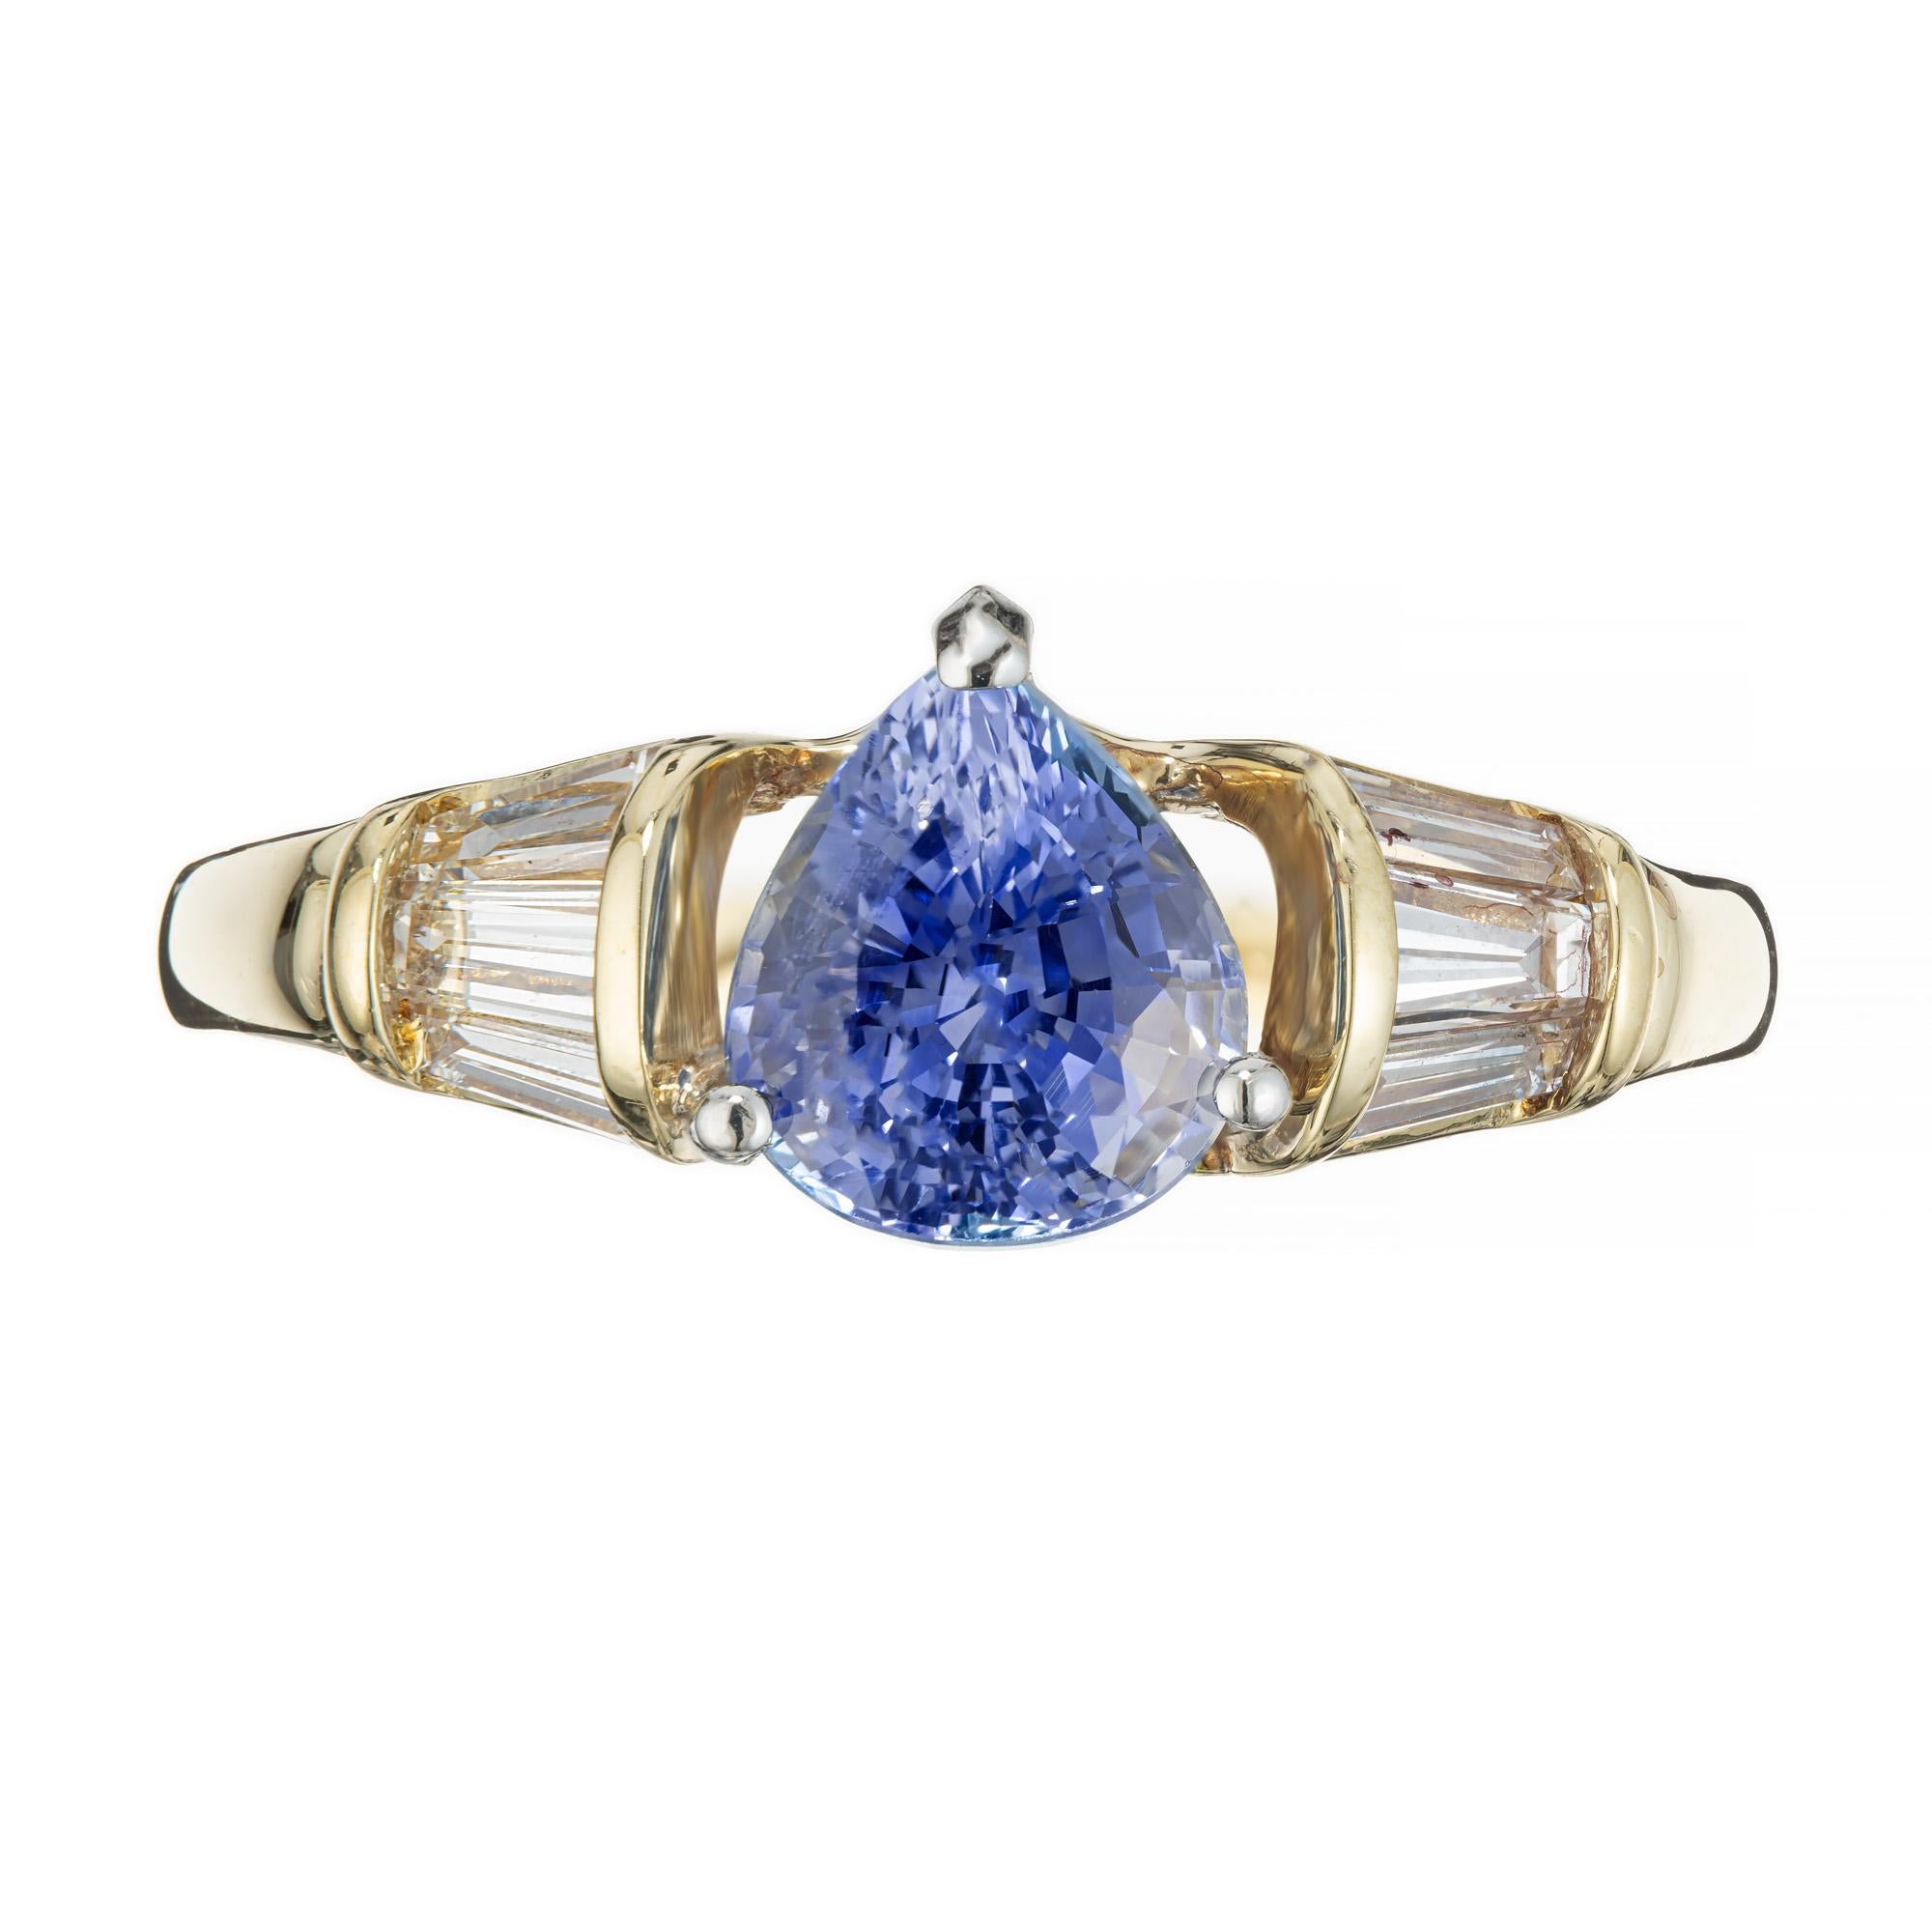 Pear shaped Periwinkle Sapphire and diamond engagement ring. AGL certified pear shaped sapphire mounted in a Platinum and 18k yellow gold setting. Accented with 6 tapered baguette side diamonds. The setting is 18k yellow gold while the crown and